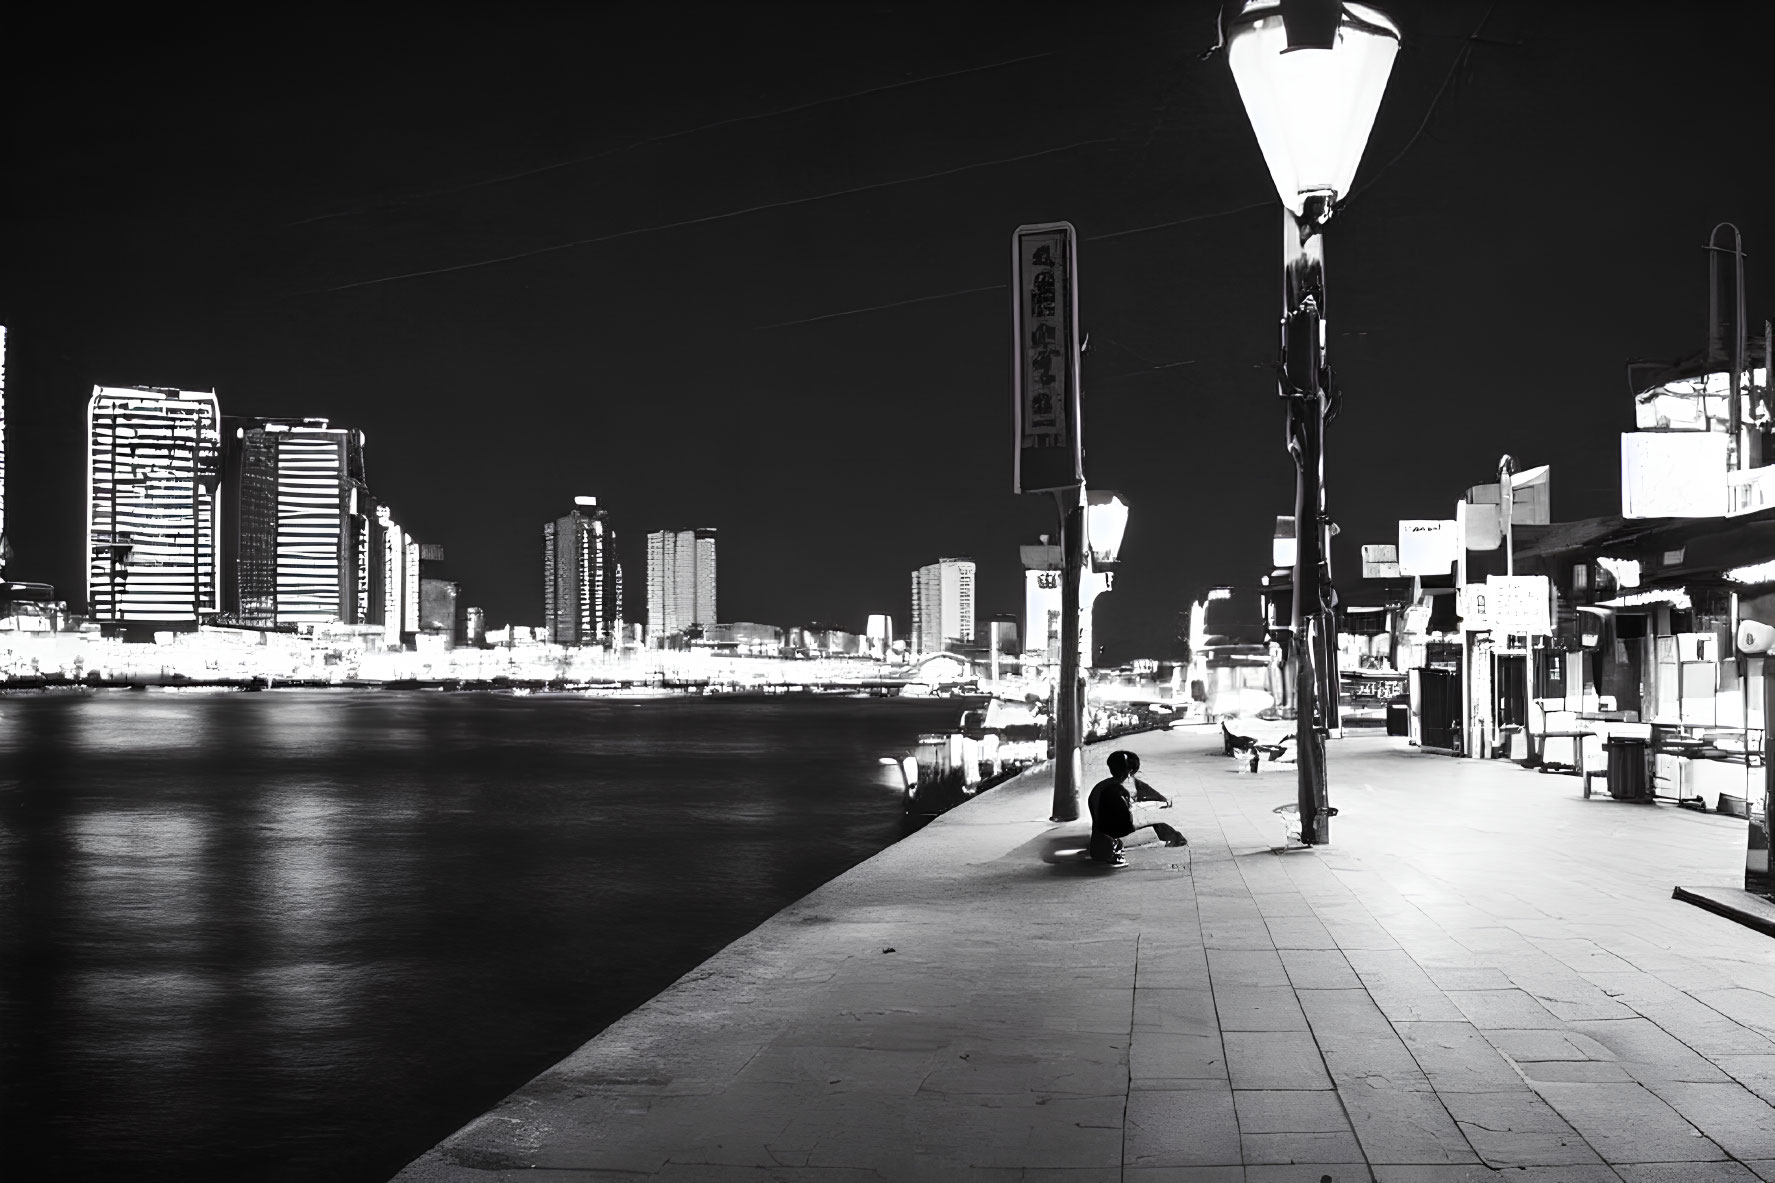 Nighttime Monochrome Cityscape with Illuminated Buildings and Riverfront Promenade